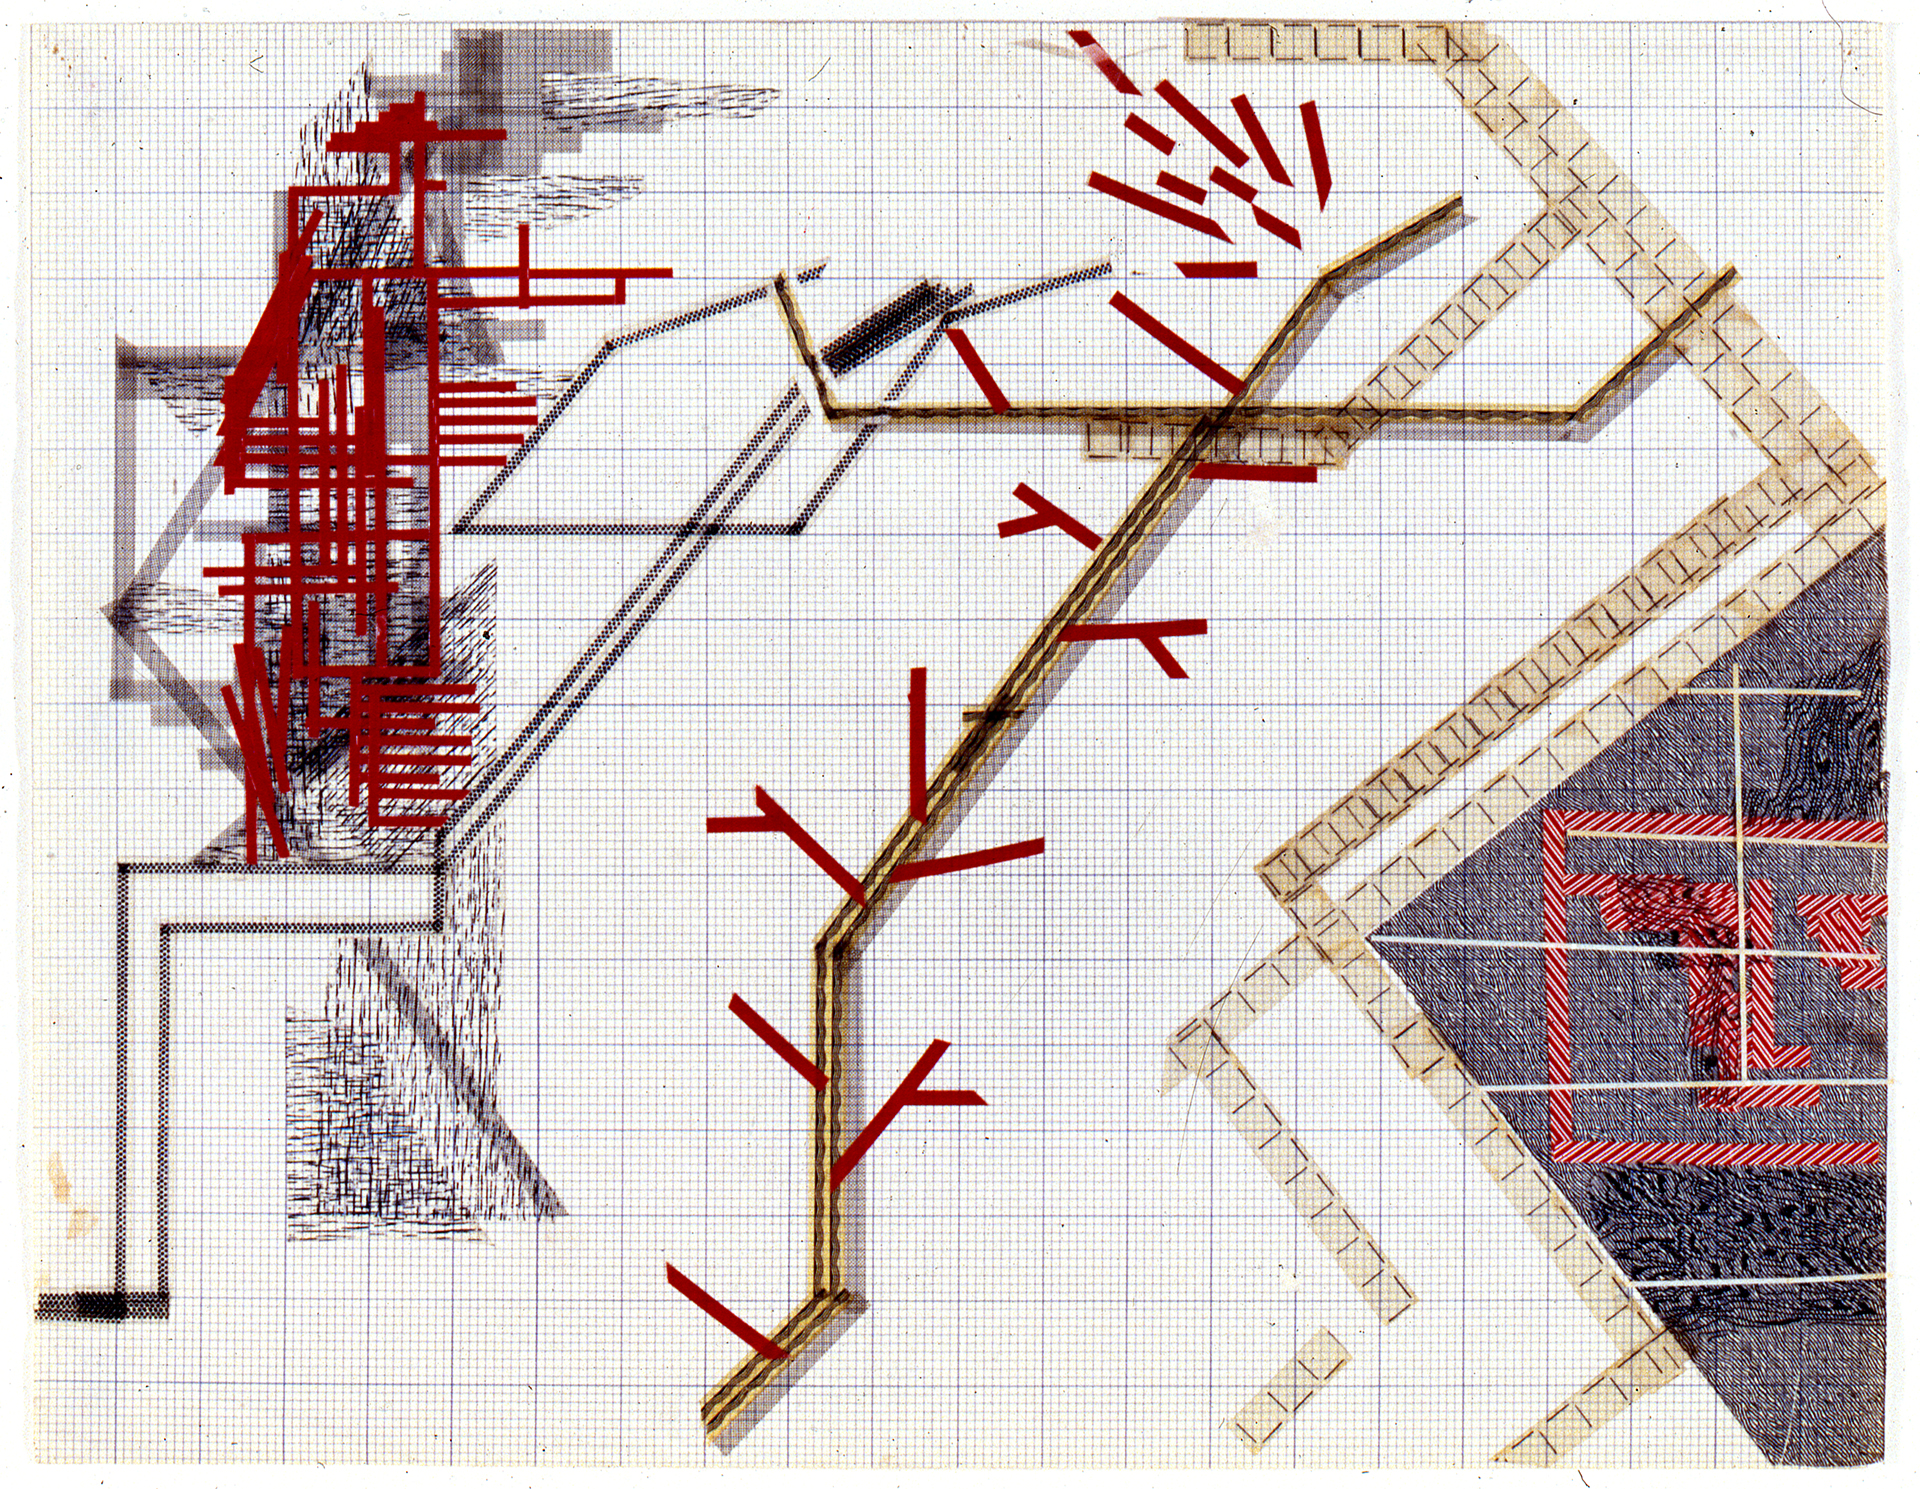 Drawing for Prototypes, 1979